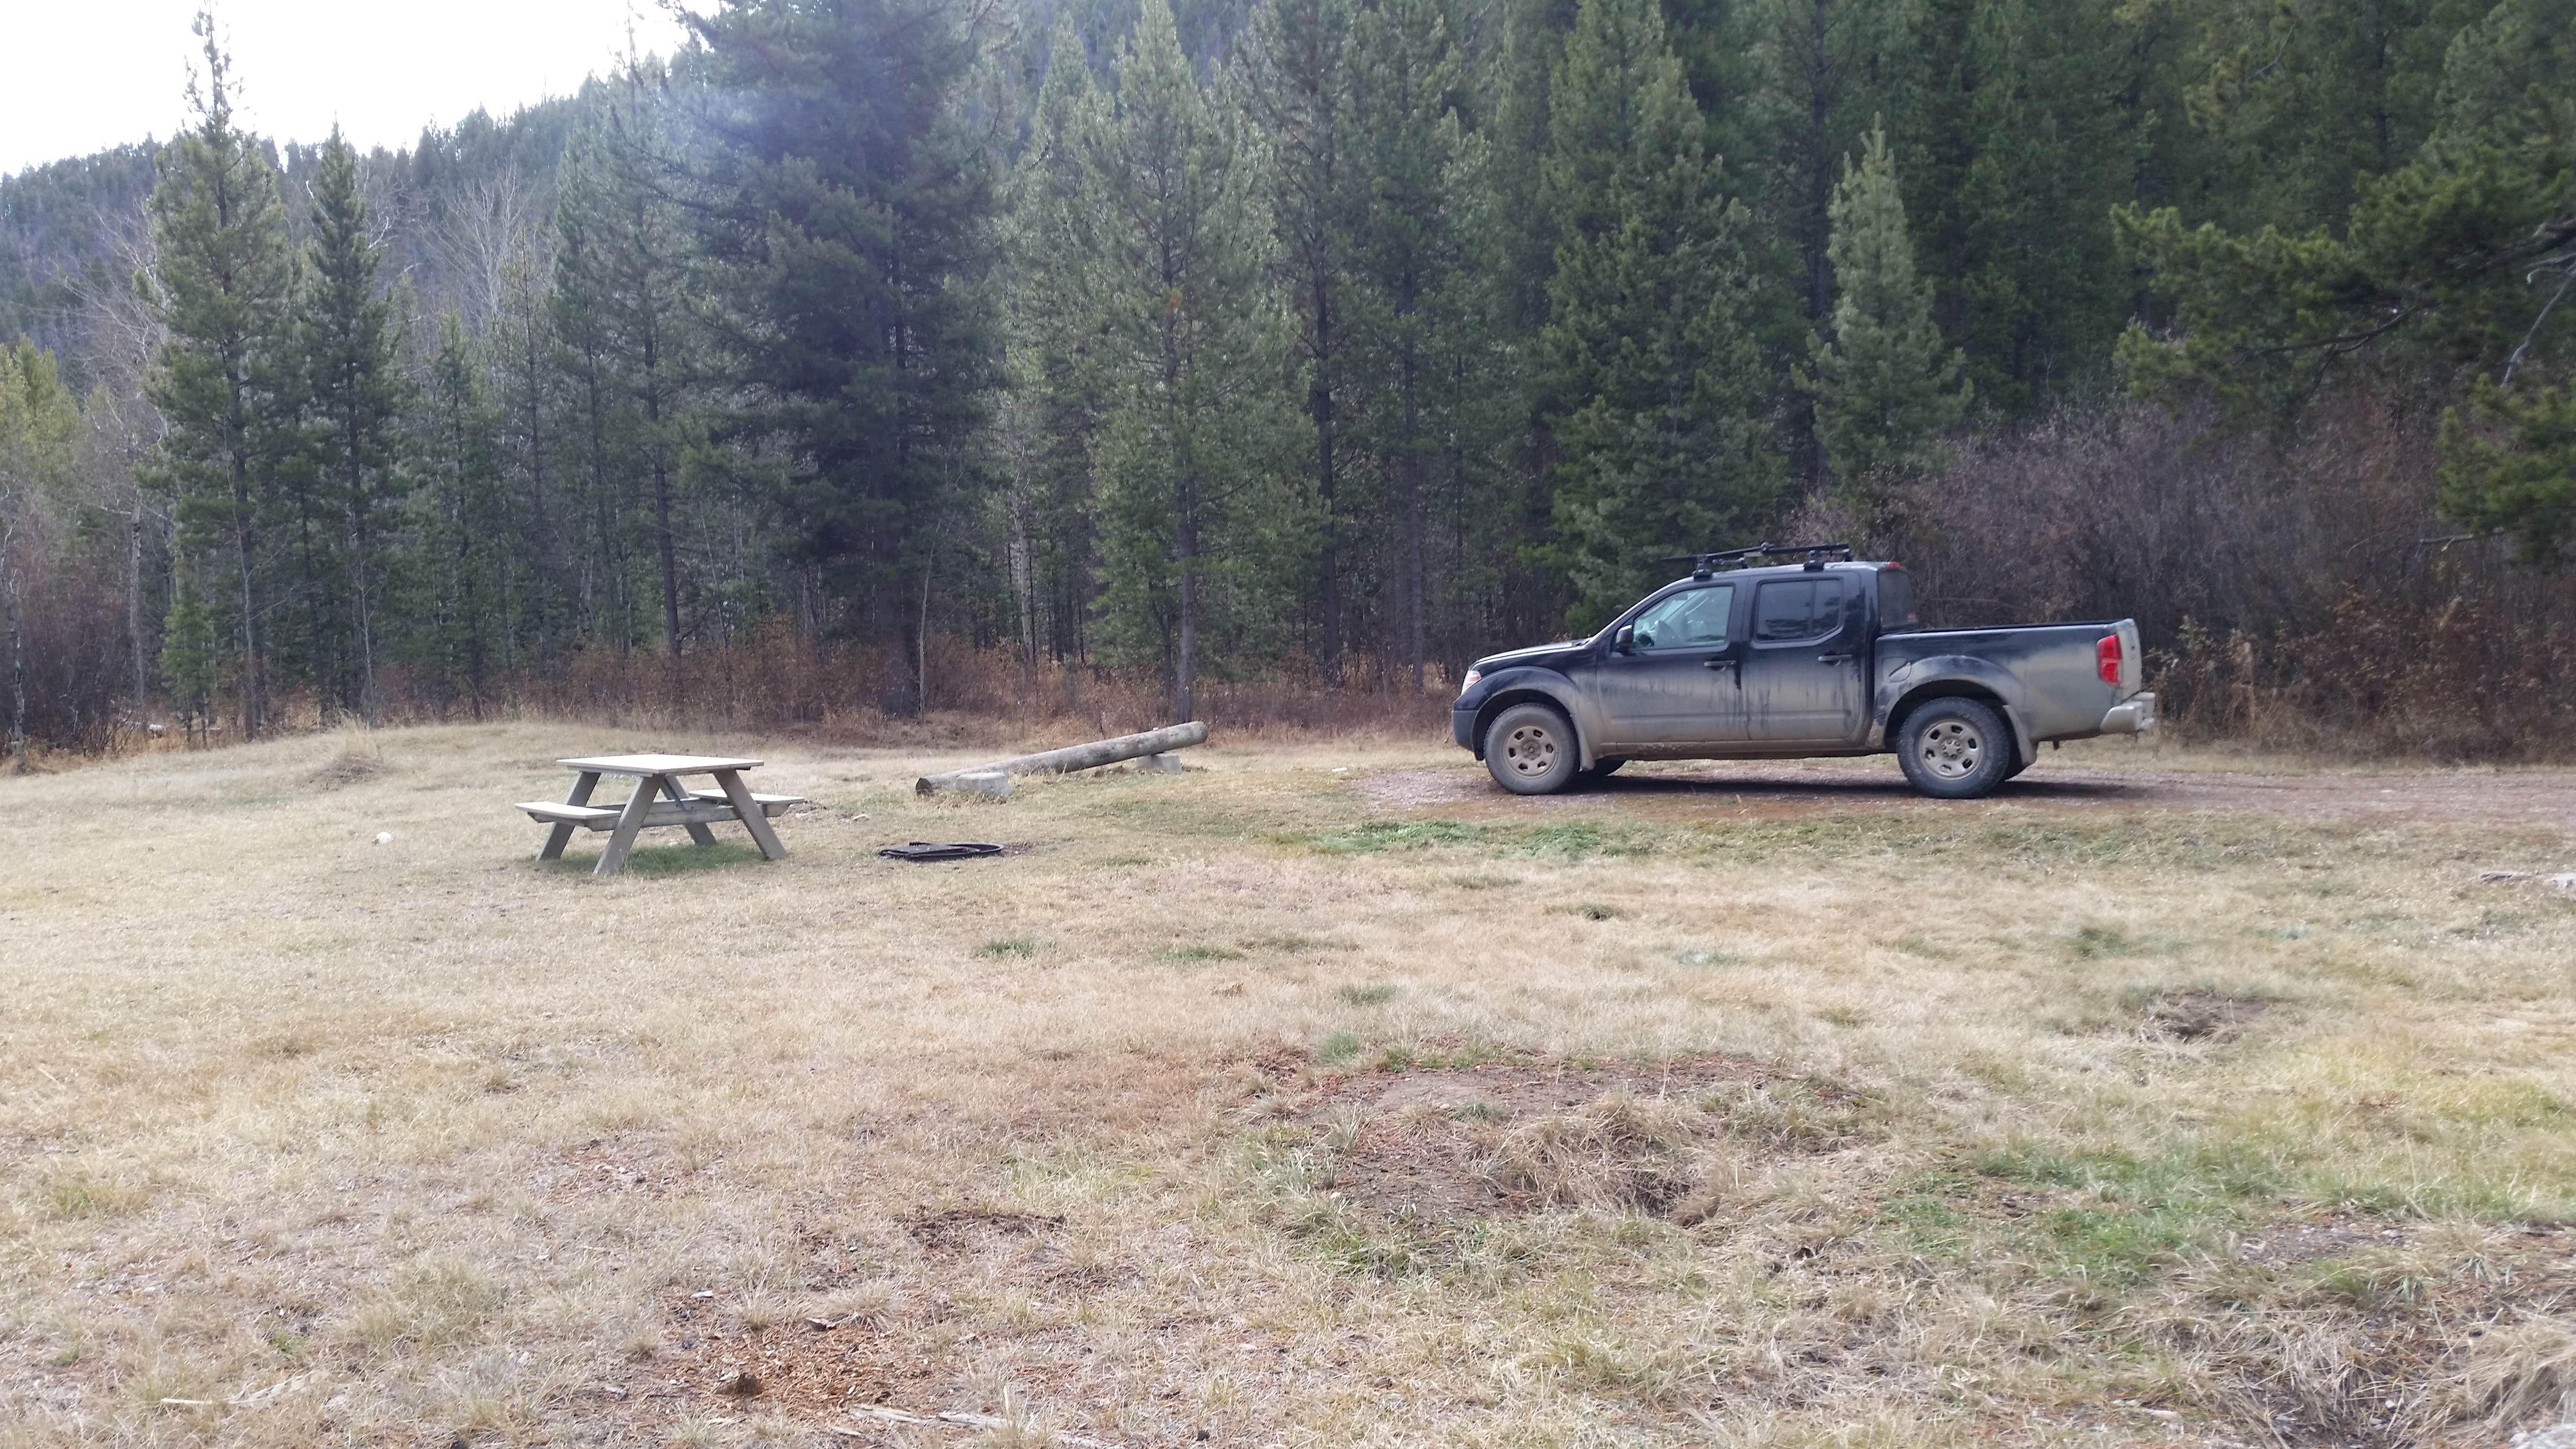 Camper submitted image from Dickie Bridge - 3